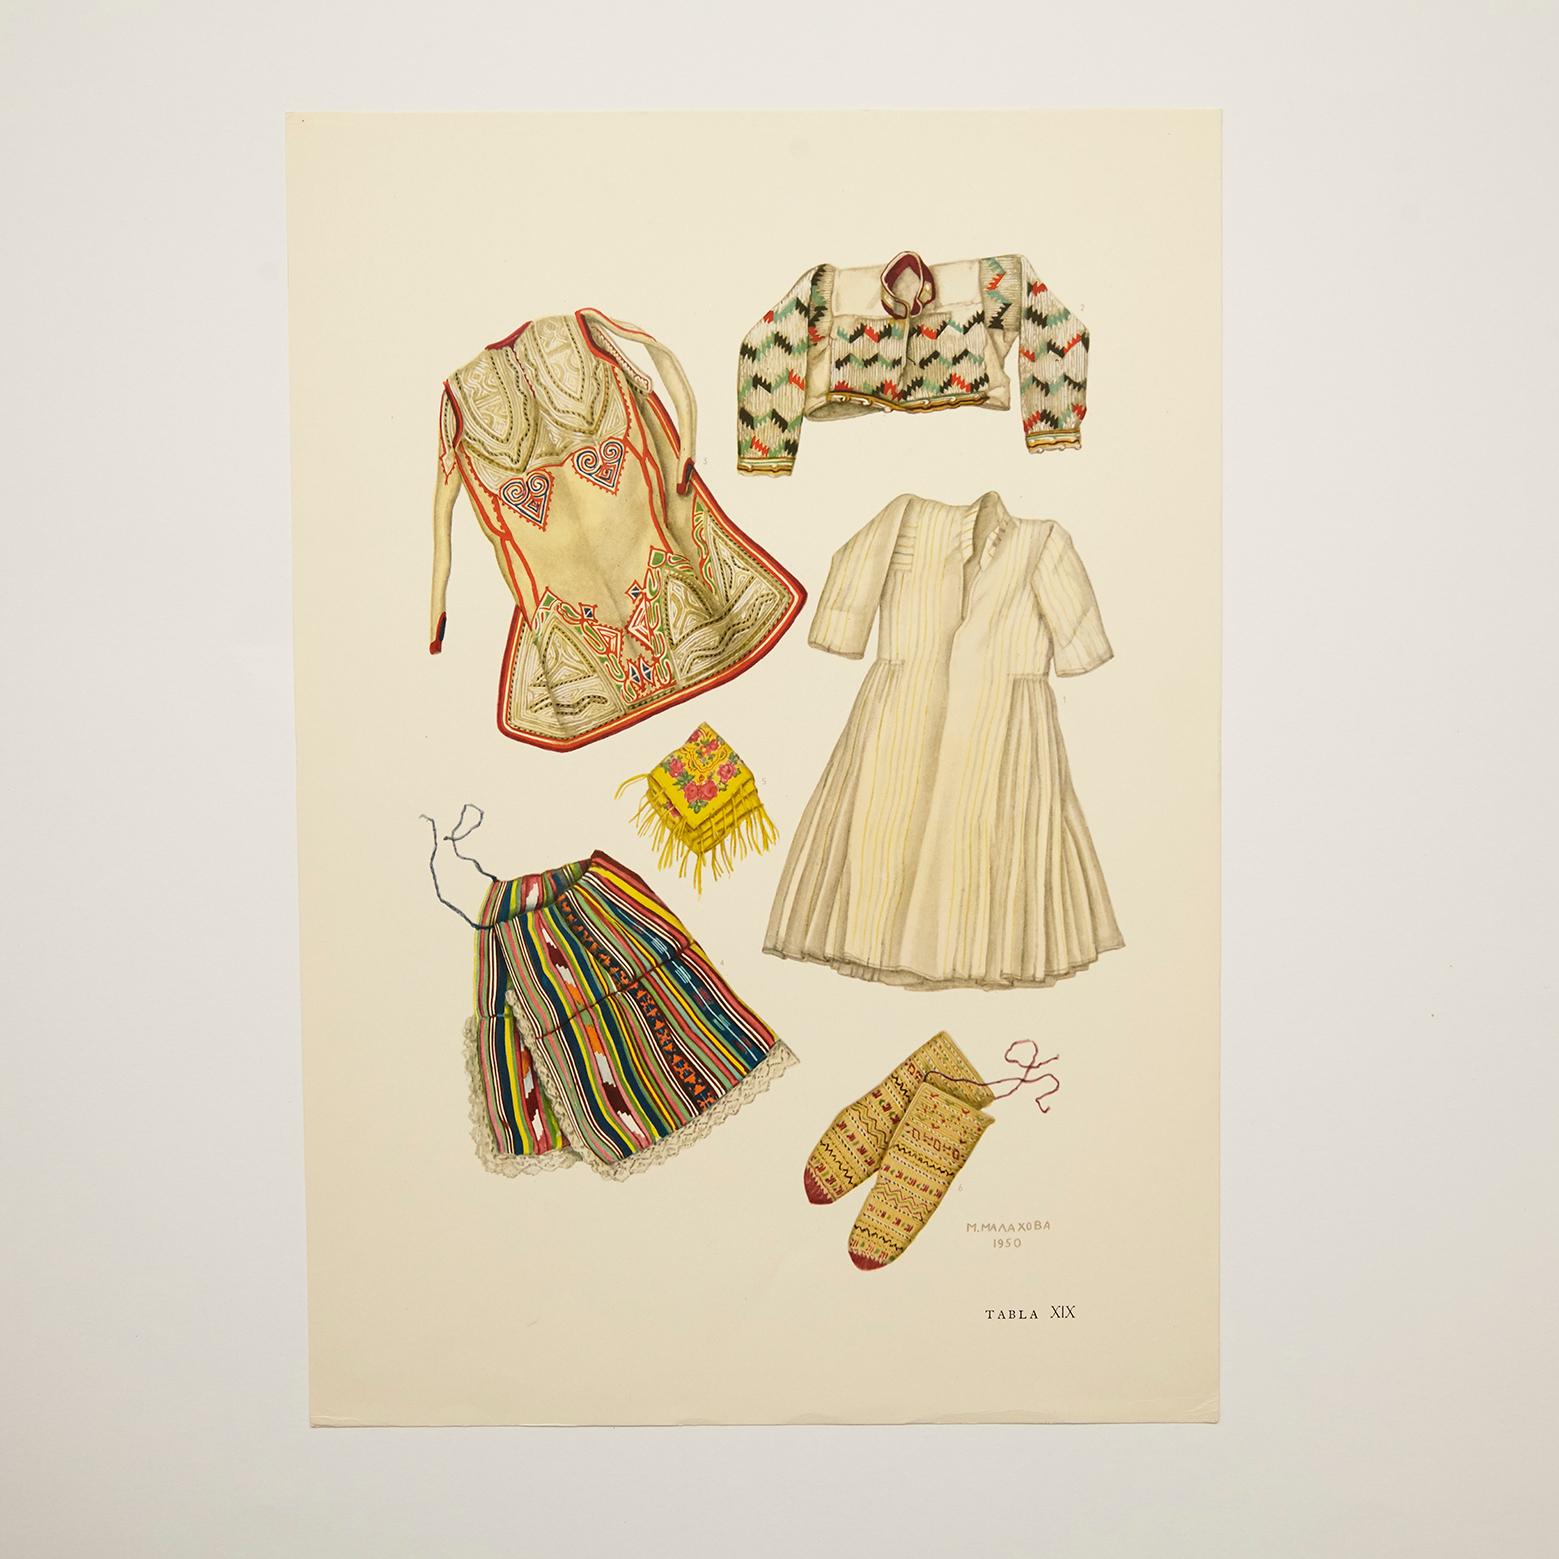 The National dresses of Macedonia illustrated by Marija Malahova and Olga Benson.

Drawing in plate, 1963.
 
Size: 48.2 x 33.8 cm

In original condition, with minor wear consistent with age and use, preserving a beautiful patina.